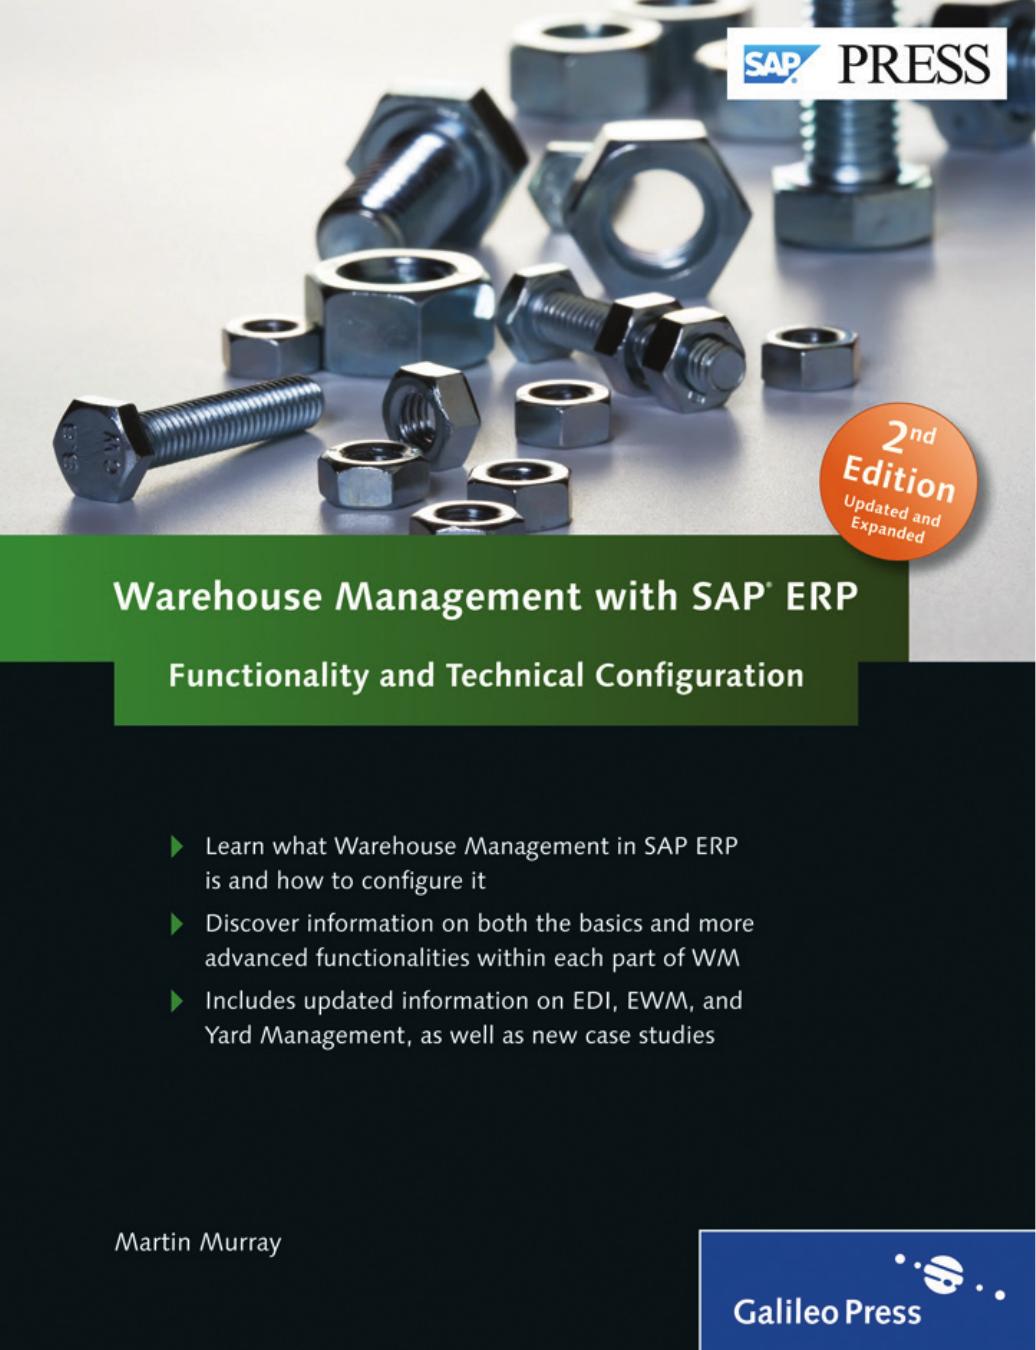 Warehouse Management with SAP ERP: Functionality and Technical Configuration by Martin Murray